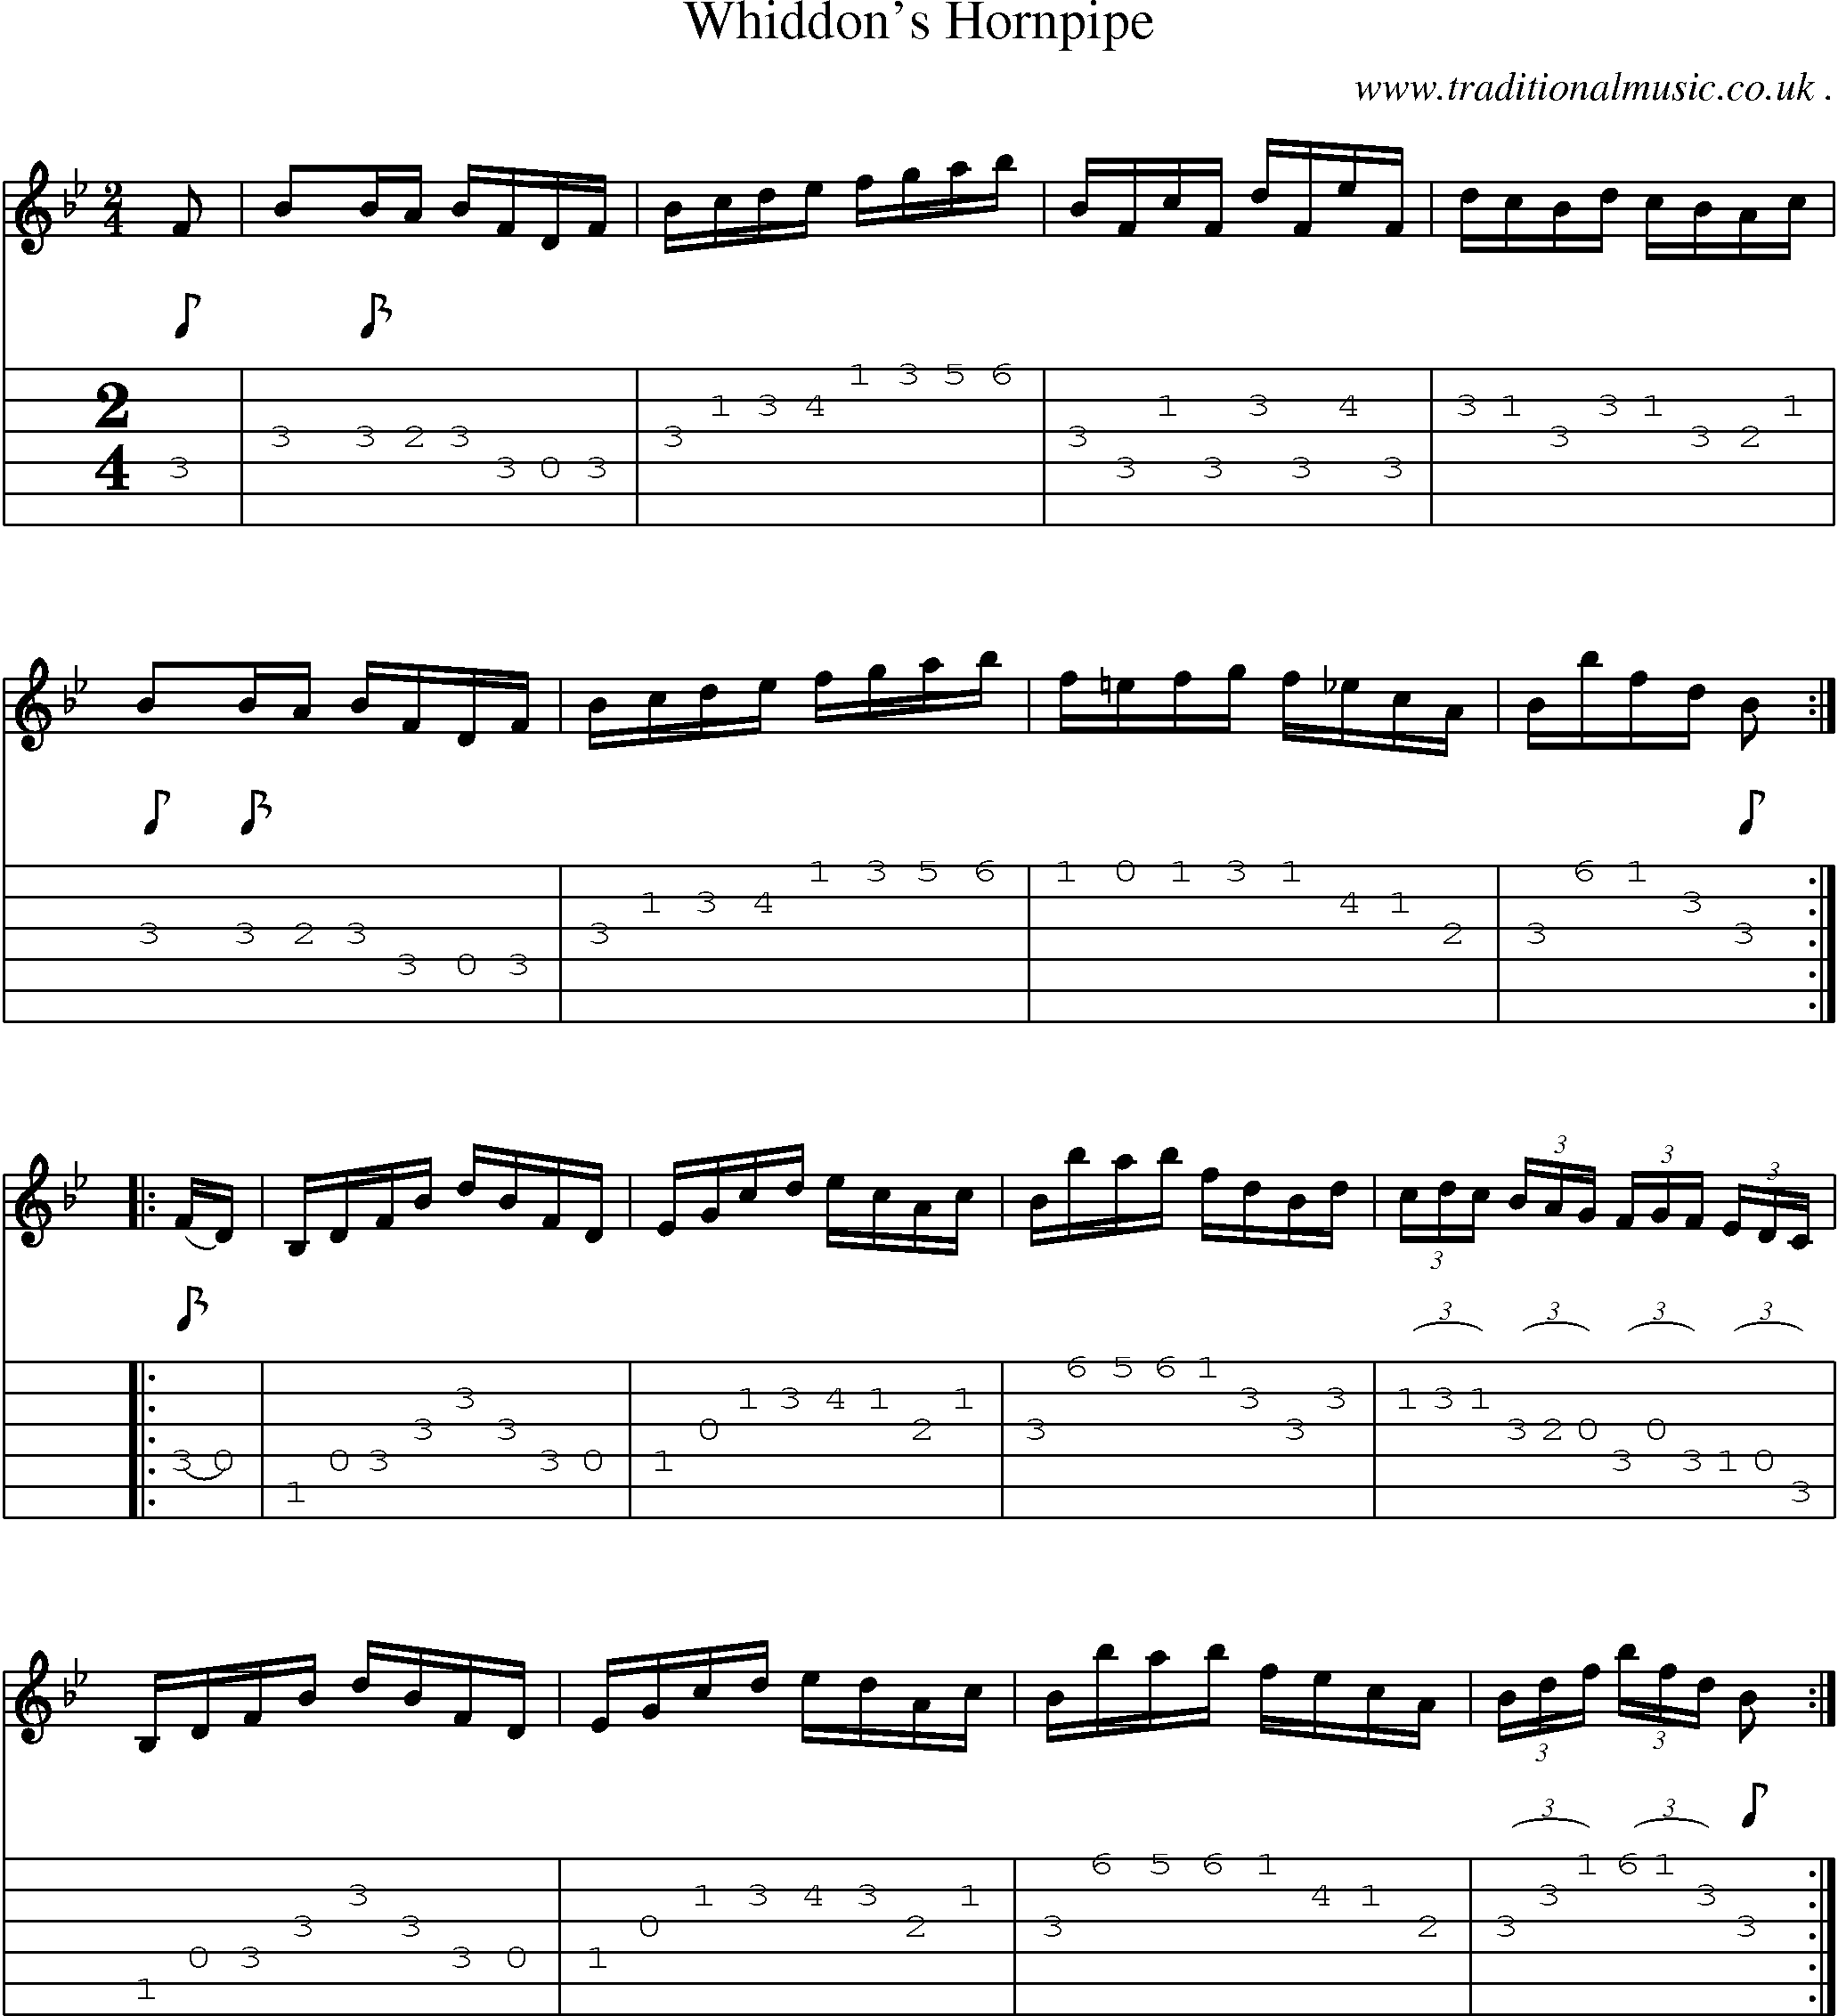 Sheet-Music and Guitar Tabs for Whiddons Hornpipe